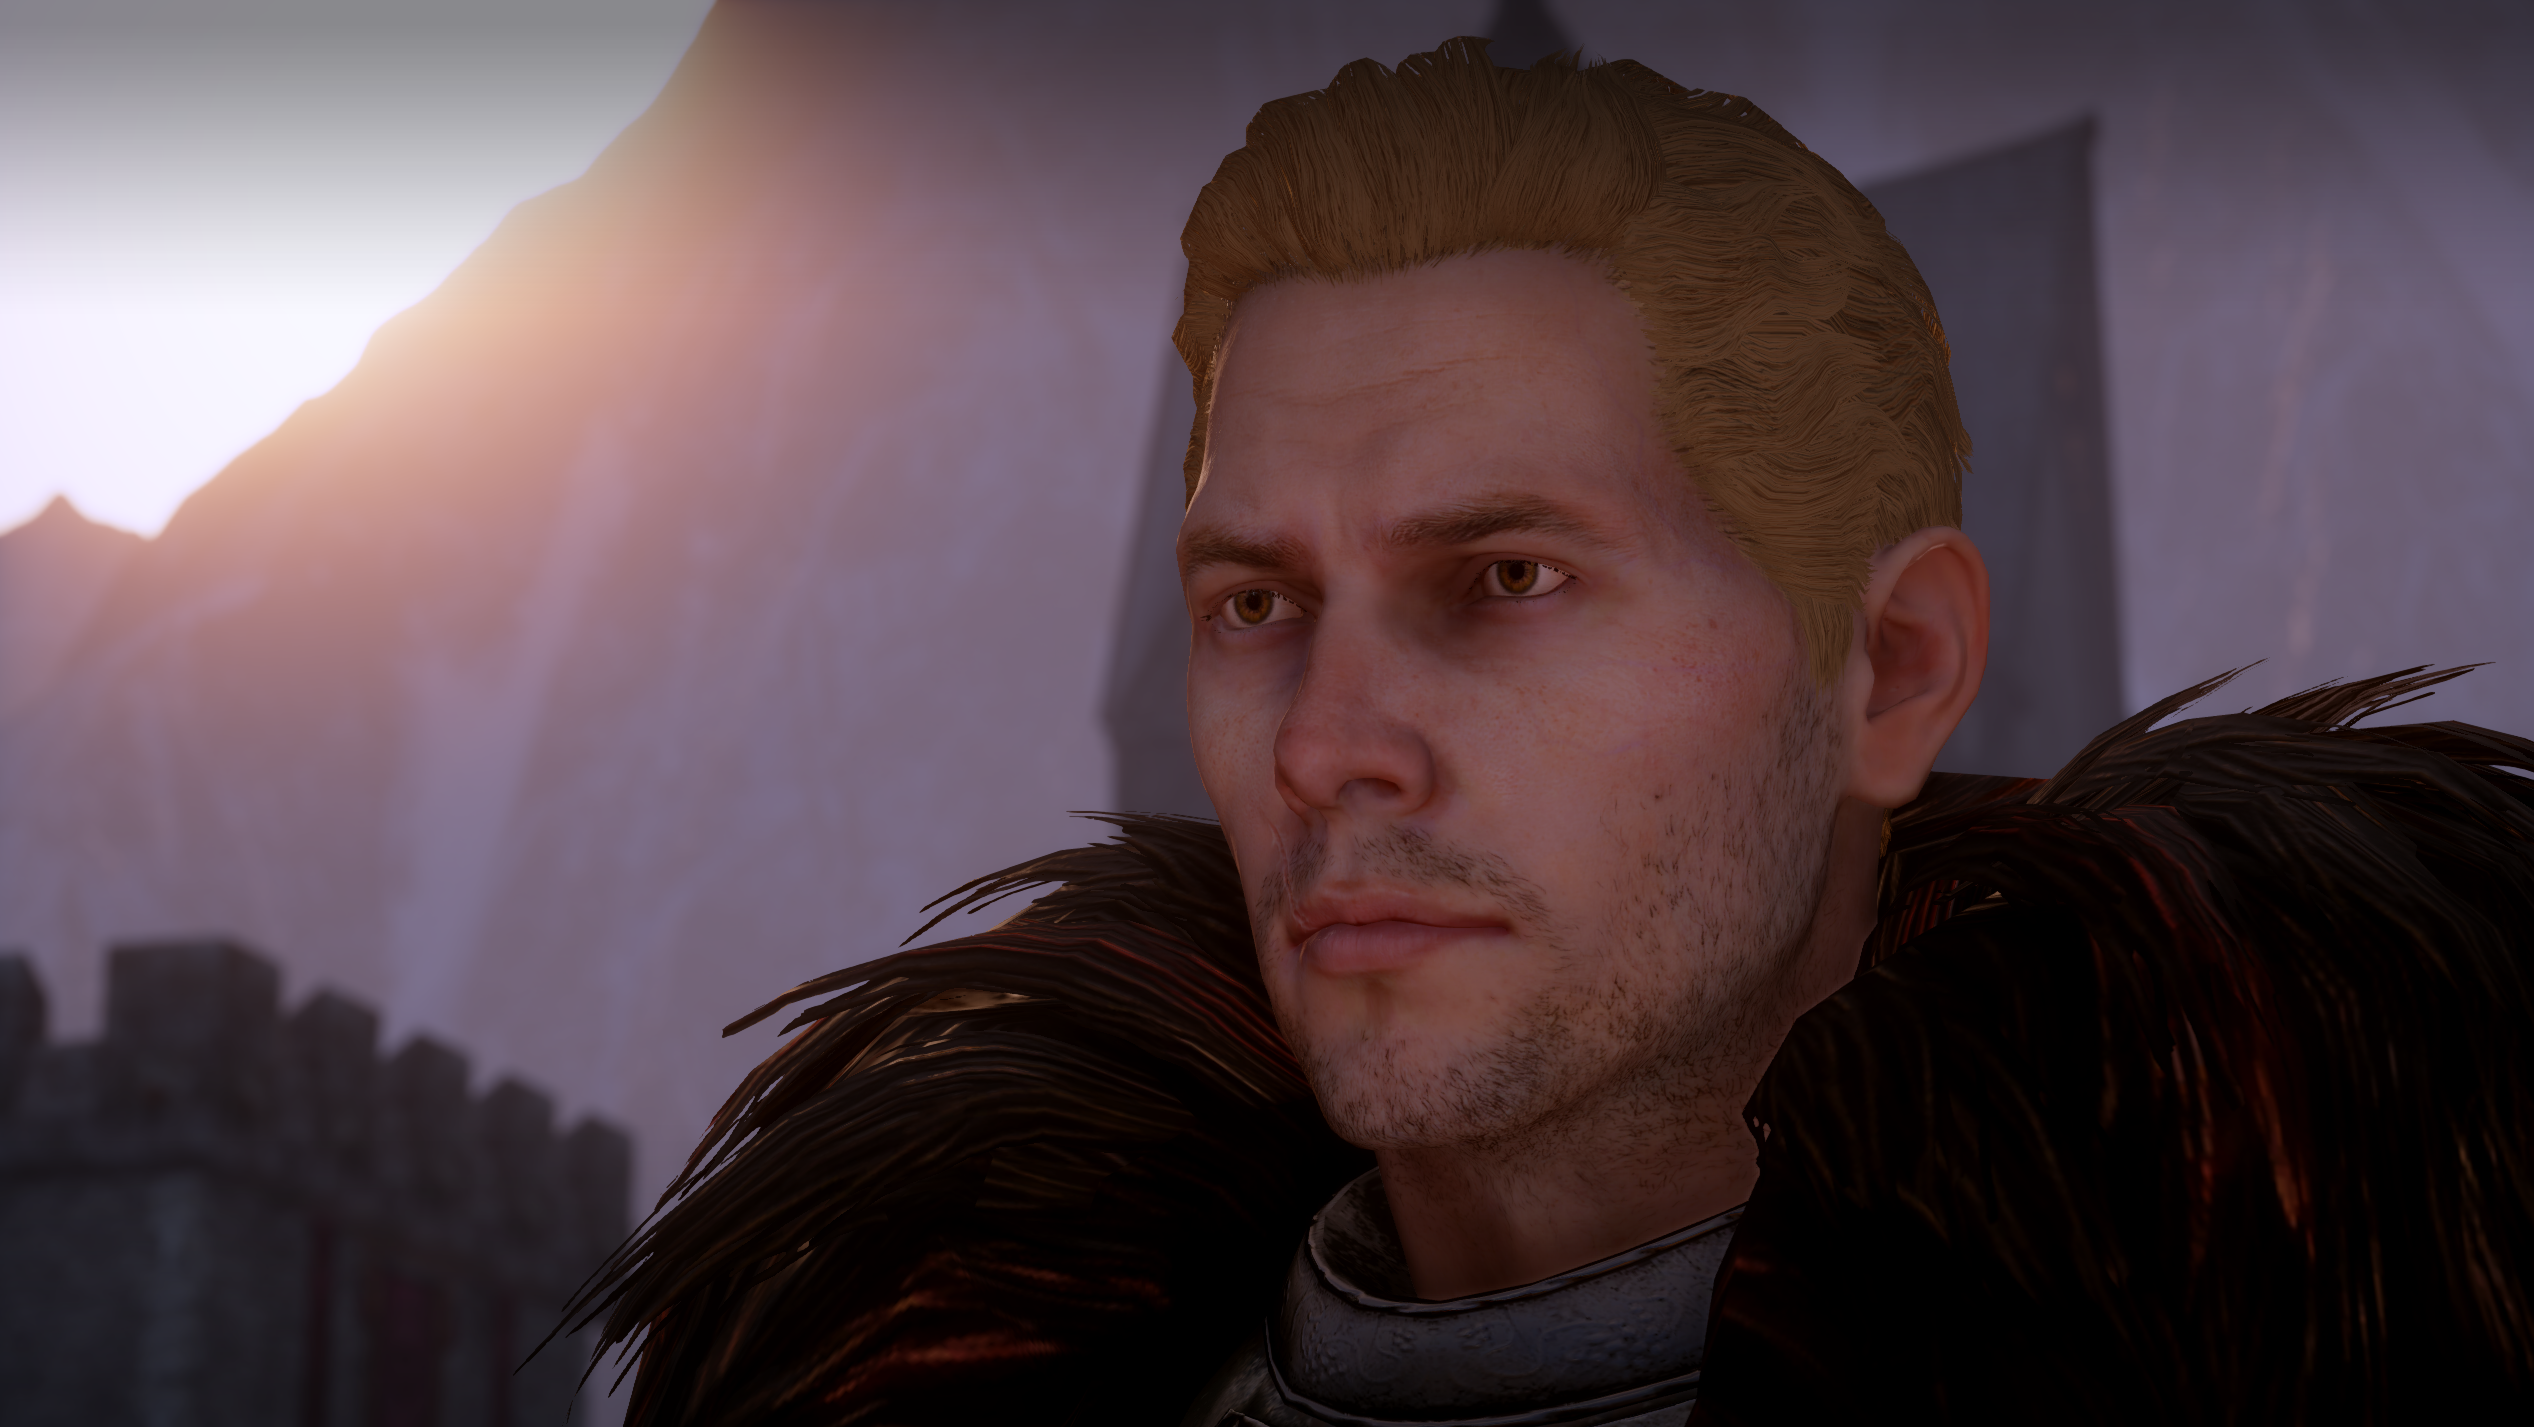 General 2534x1427 Dragon Age: Inquisition Dragon Age Cullen Rutherford PC gaming digital art closeup video games